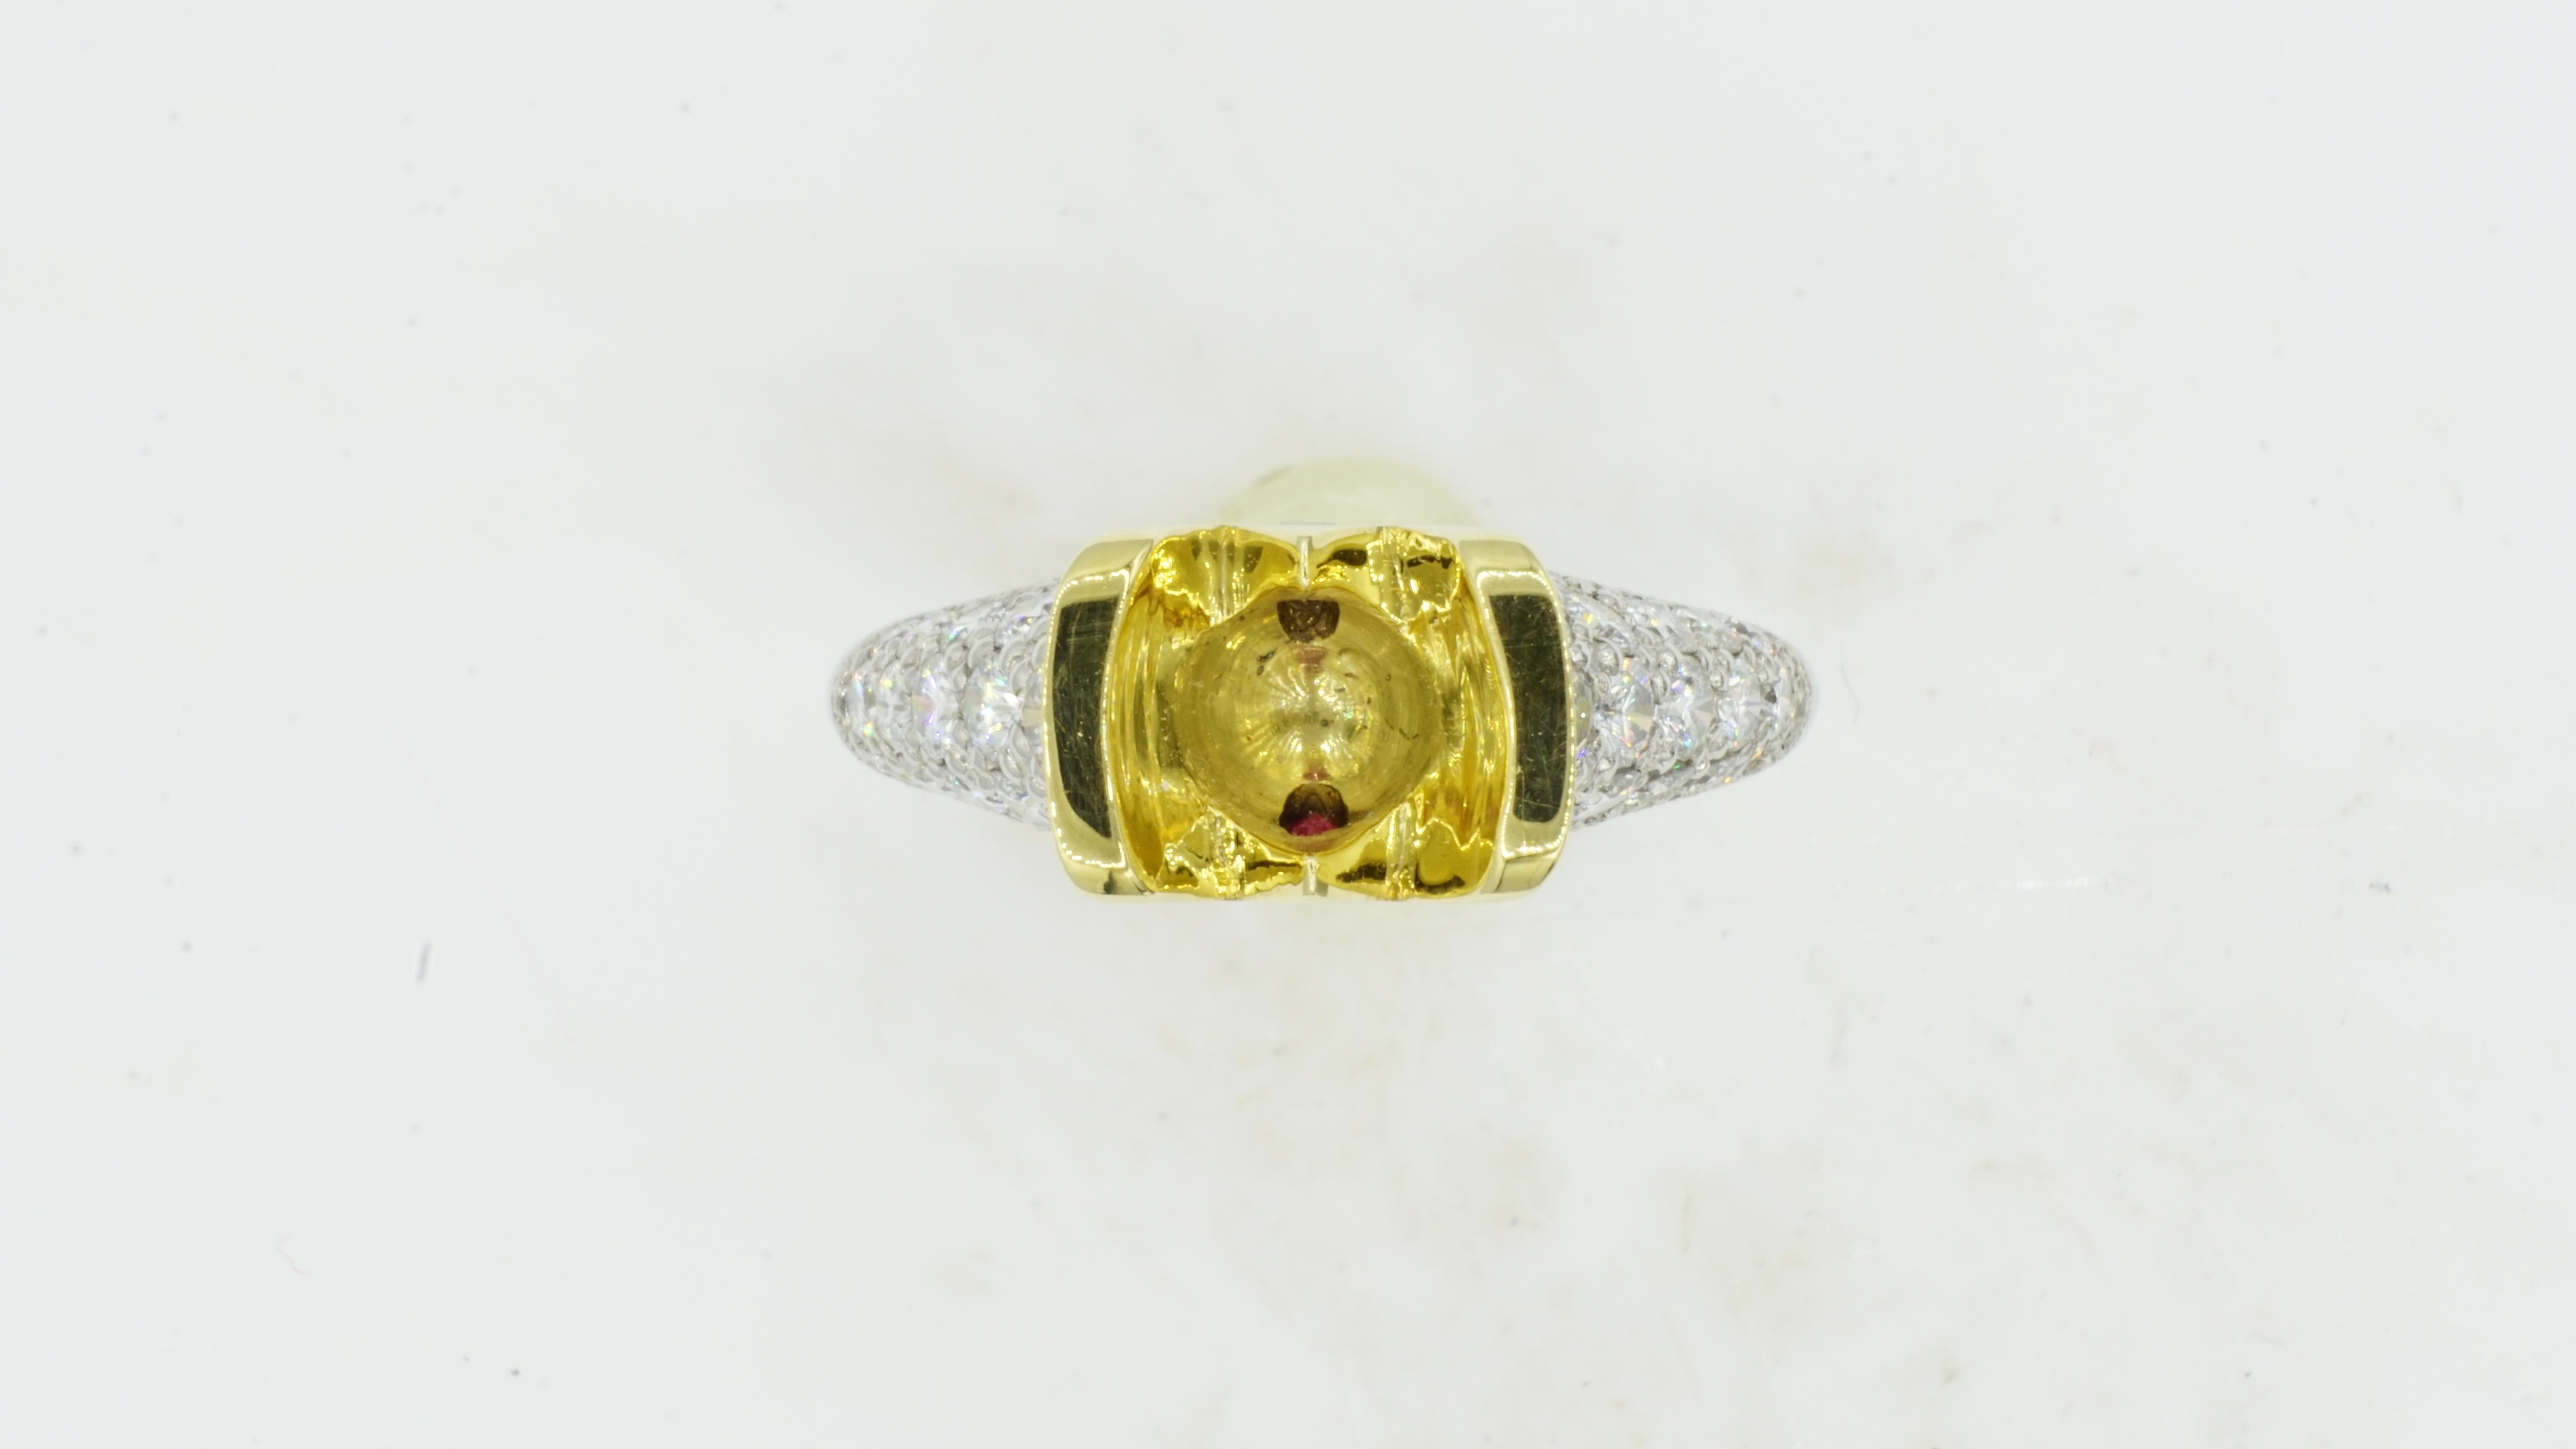 Brand new ring design by Rock N Gold Creations. Platinum and 18kt yellow gold semi-mount ring will make a perfect setting for a 9 mm stone, which is approximately 2.25ct for a diamond. This ring would look beautiful with a fine sapphire or fine ruby